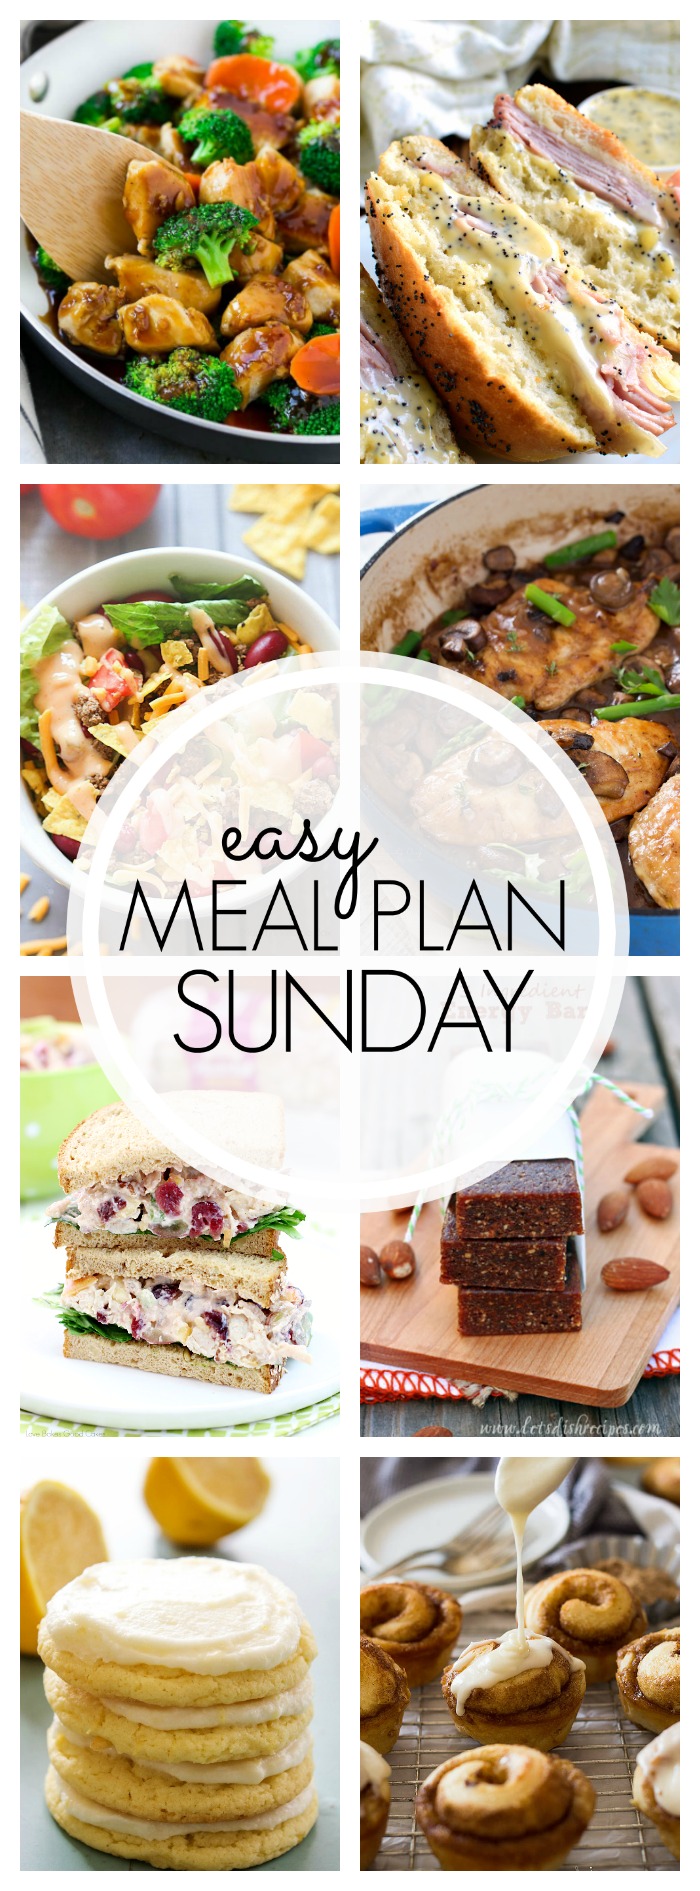 Easy Meal Plan Sunday #91